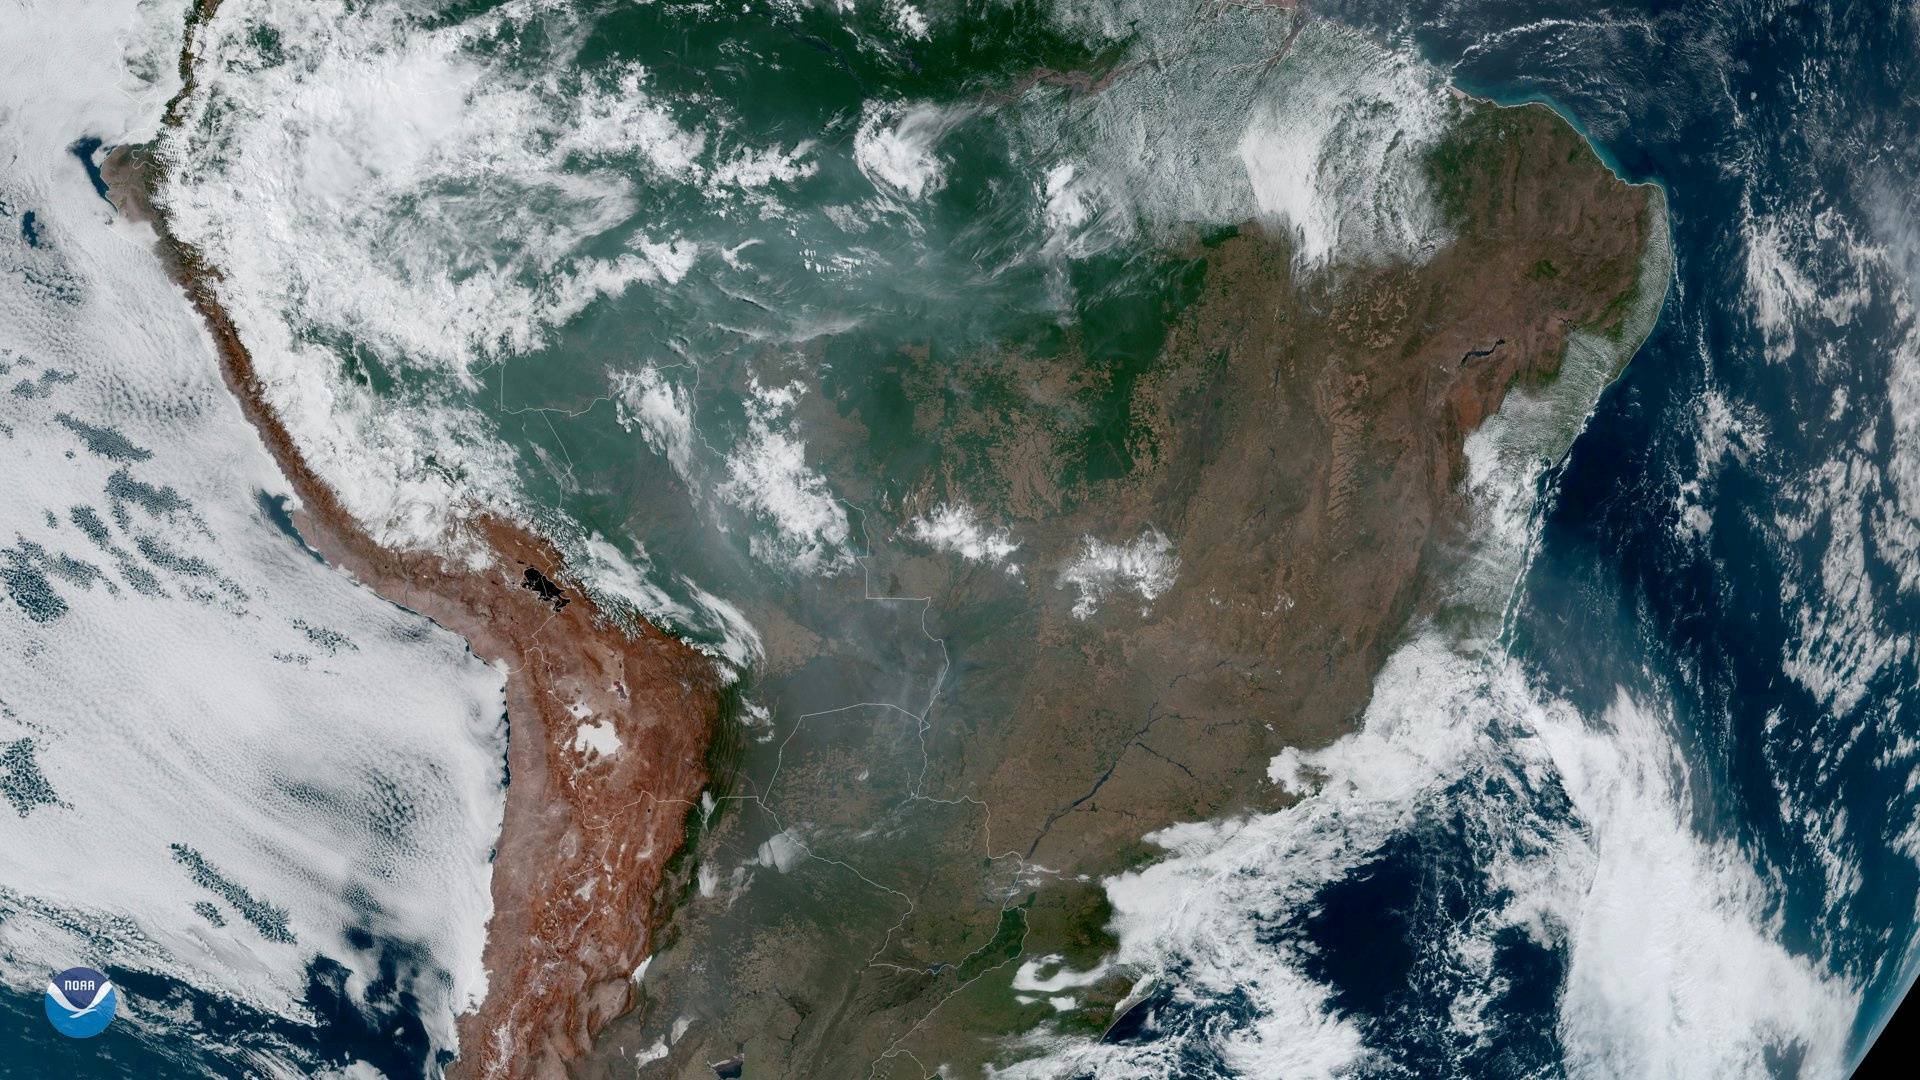 Fires burning in the Amazon Rainforest are pictured from space